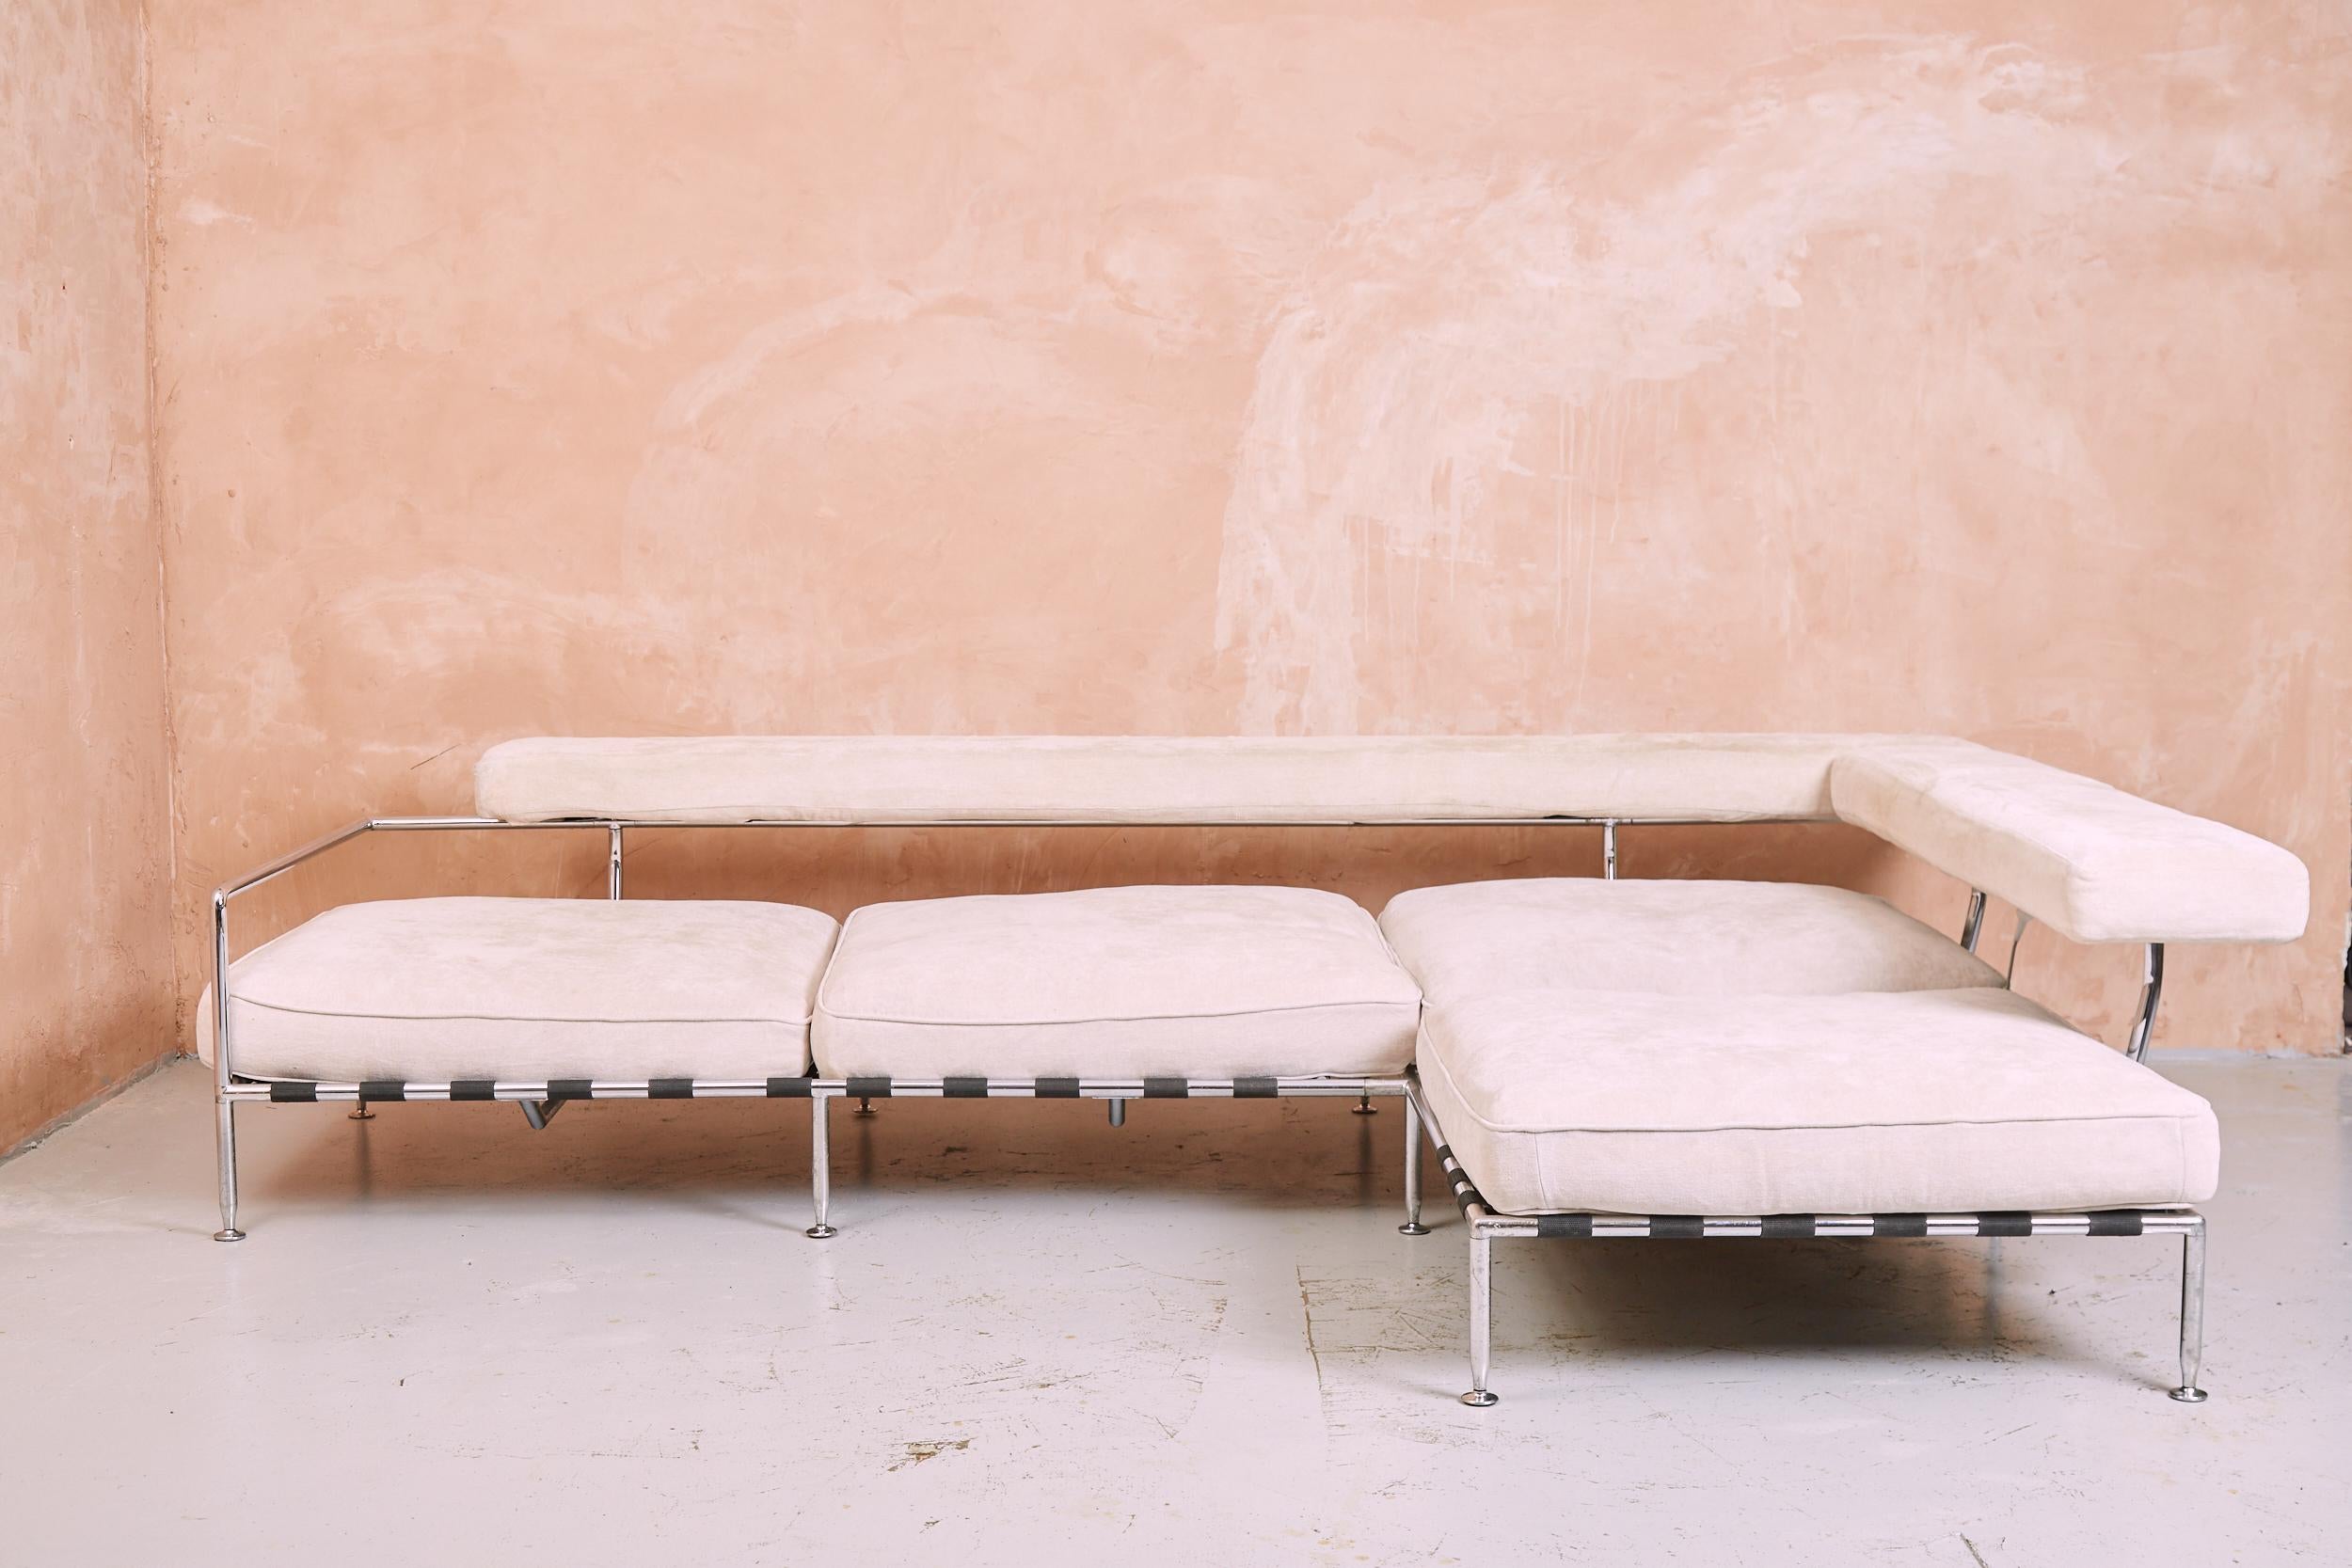 A large, extremely comfortable and versatile sofa by Antonio Citterio for B&B Italia, designed in the late 1990s. Chromed tubular steel lower frame, strap supports, loose seat cushion attach to straps via velcro. Swivelling backrest and upholstered